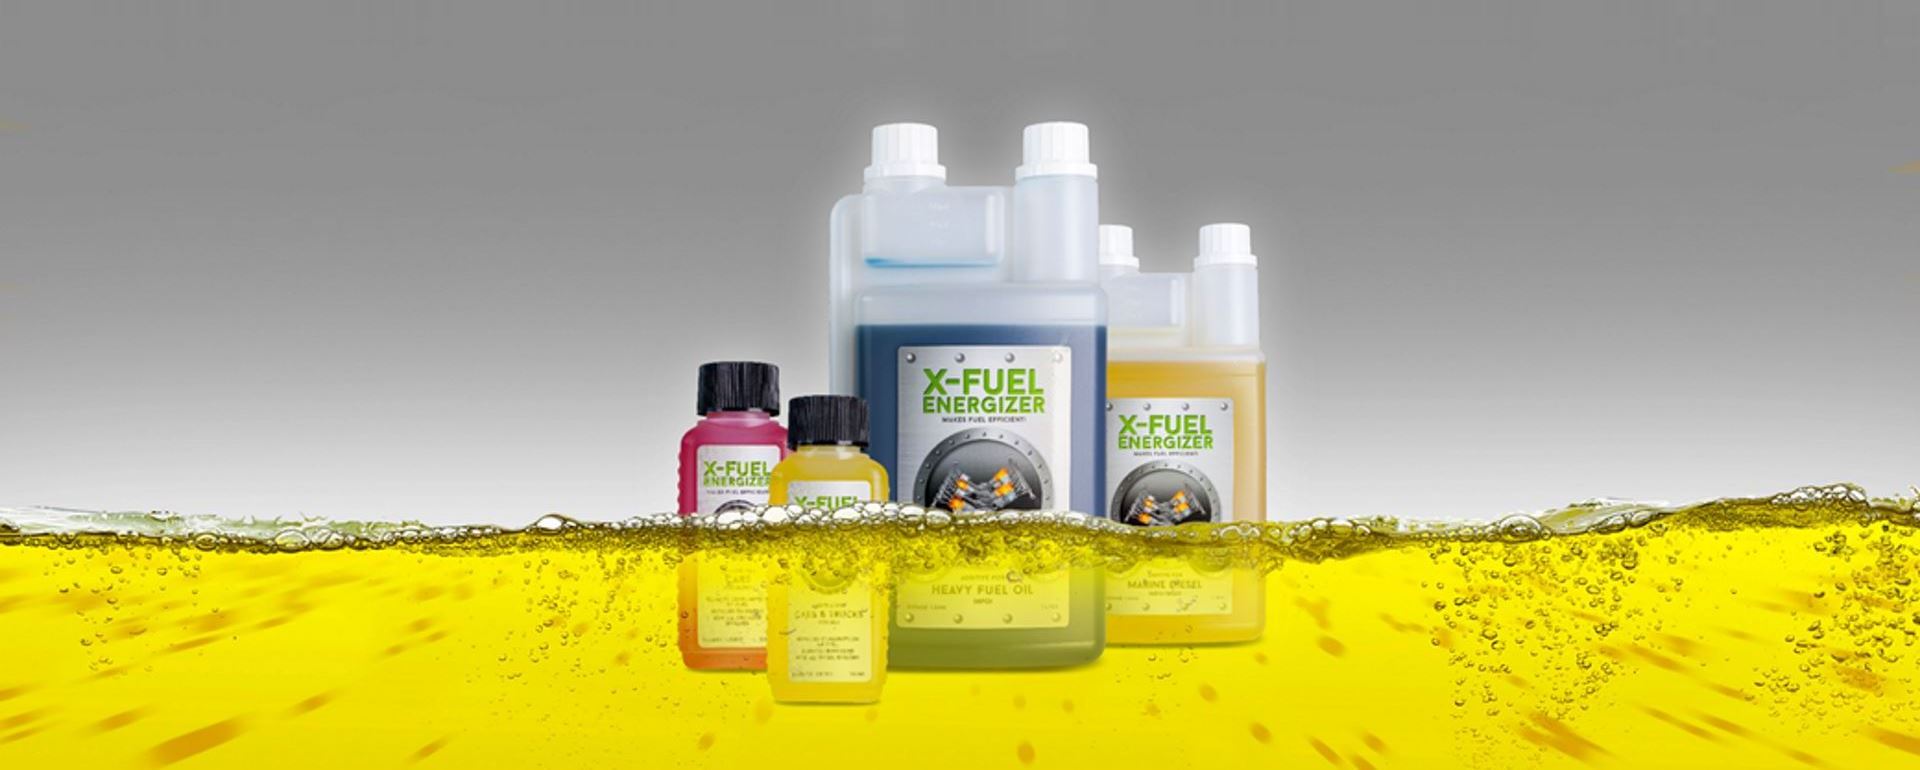 X-Fuel Energizer Products